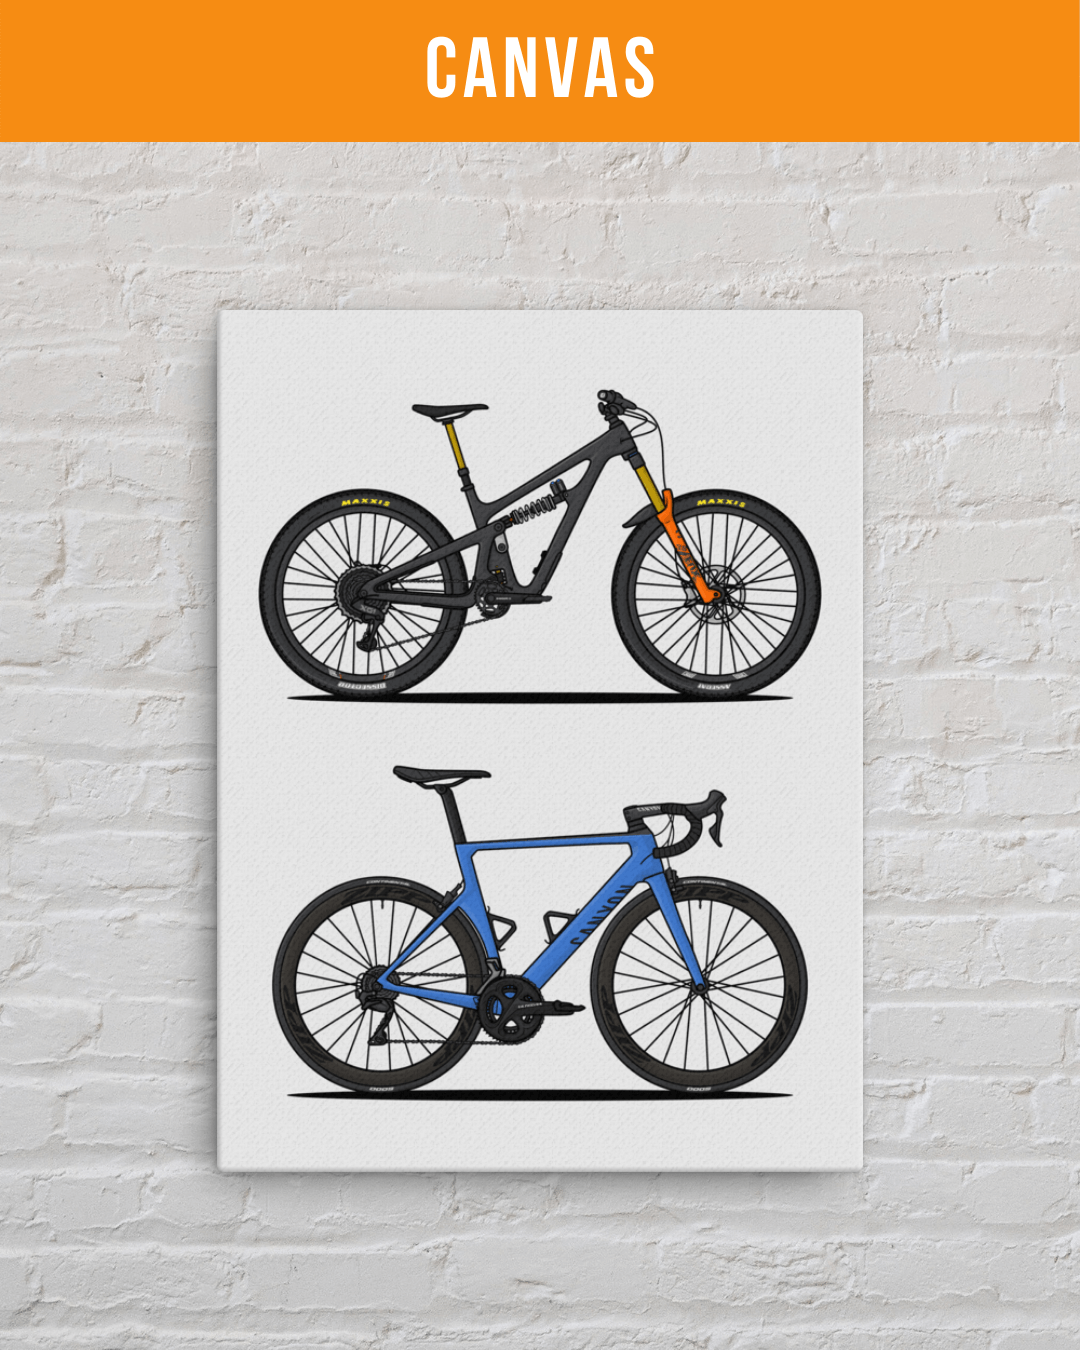 Personalized Bicycle Canvas Print 2 bikes by Stand Out Bikes 